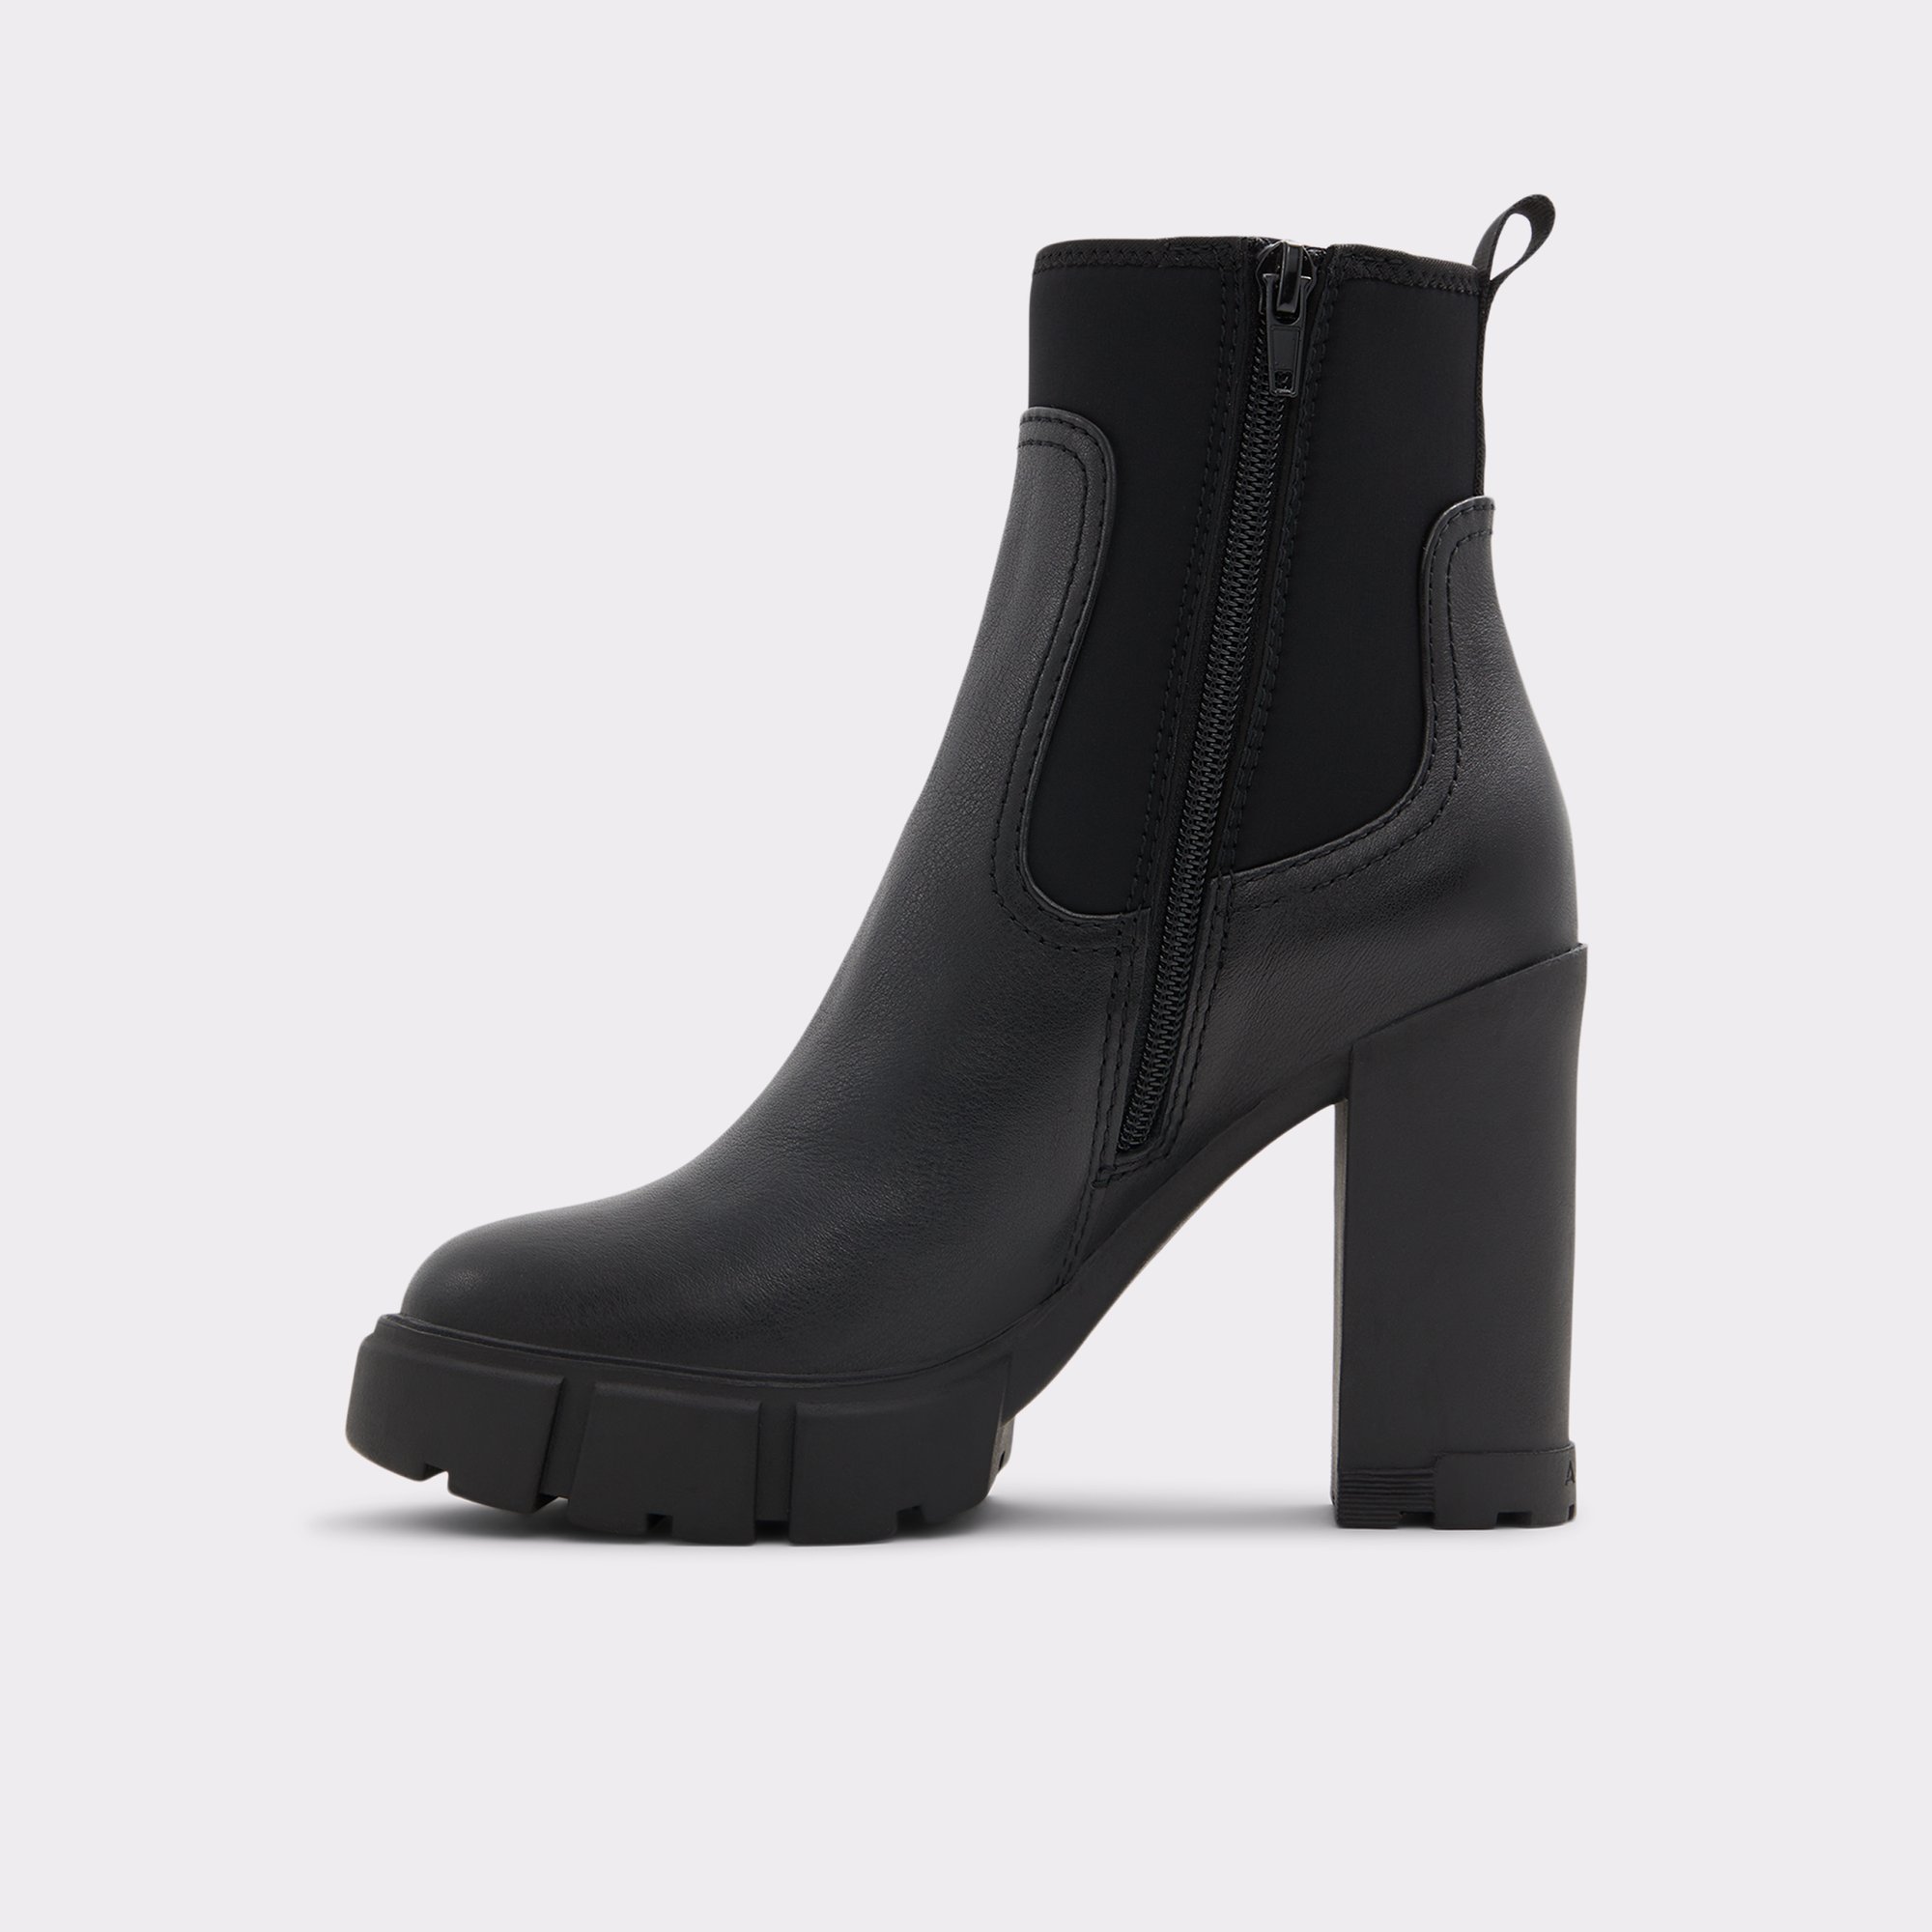 ALDO Bolder Black Leather Mixed Material Women's Chelsea boots